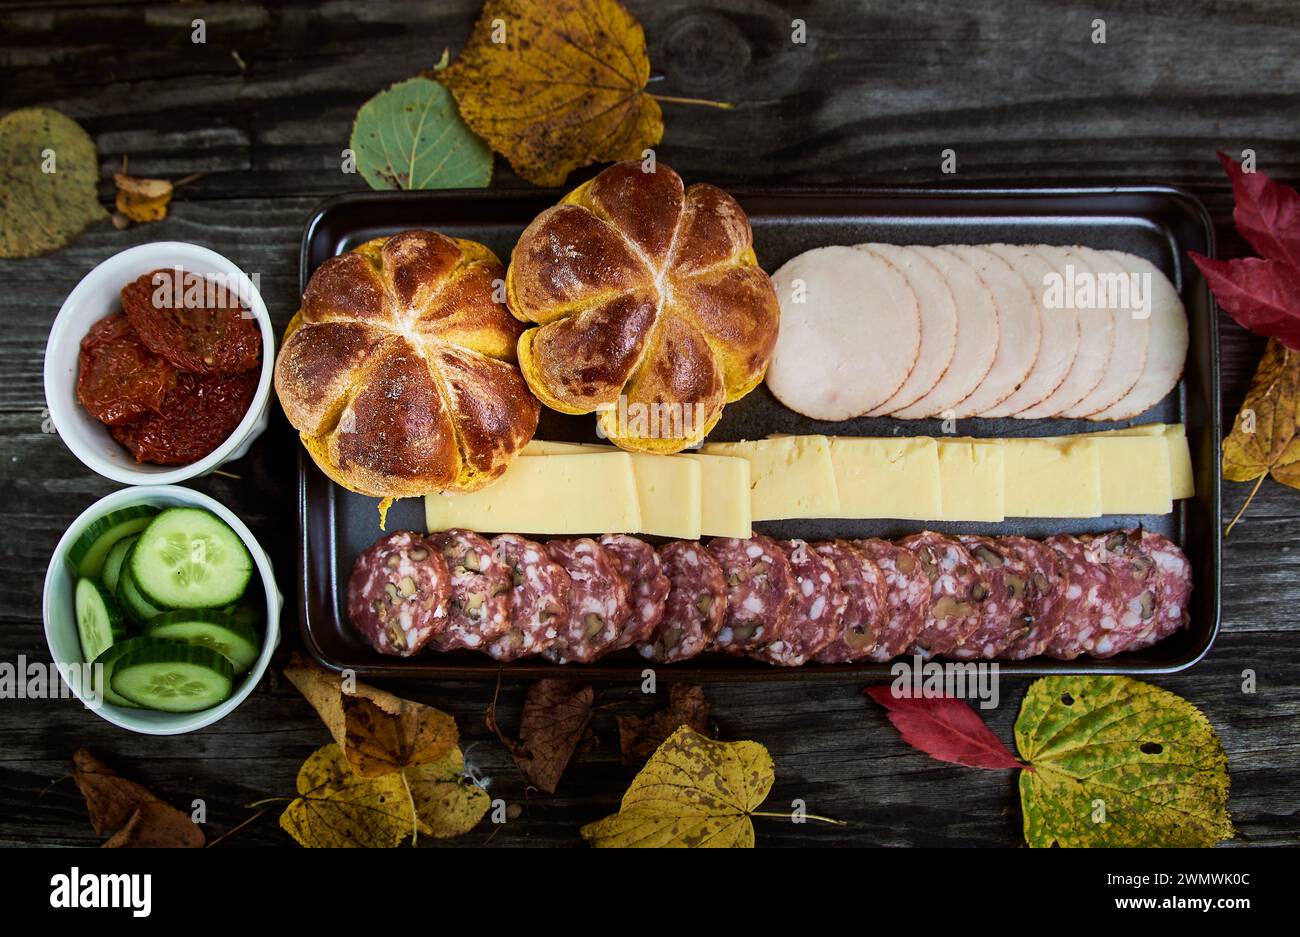 Top view autumnal picnic or outdoor meal with pumpkin panini, salami, ham and cheese on wooden background. Aerial view of food surrounded by leaves Stock Photo